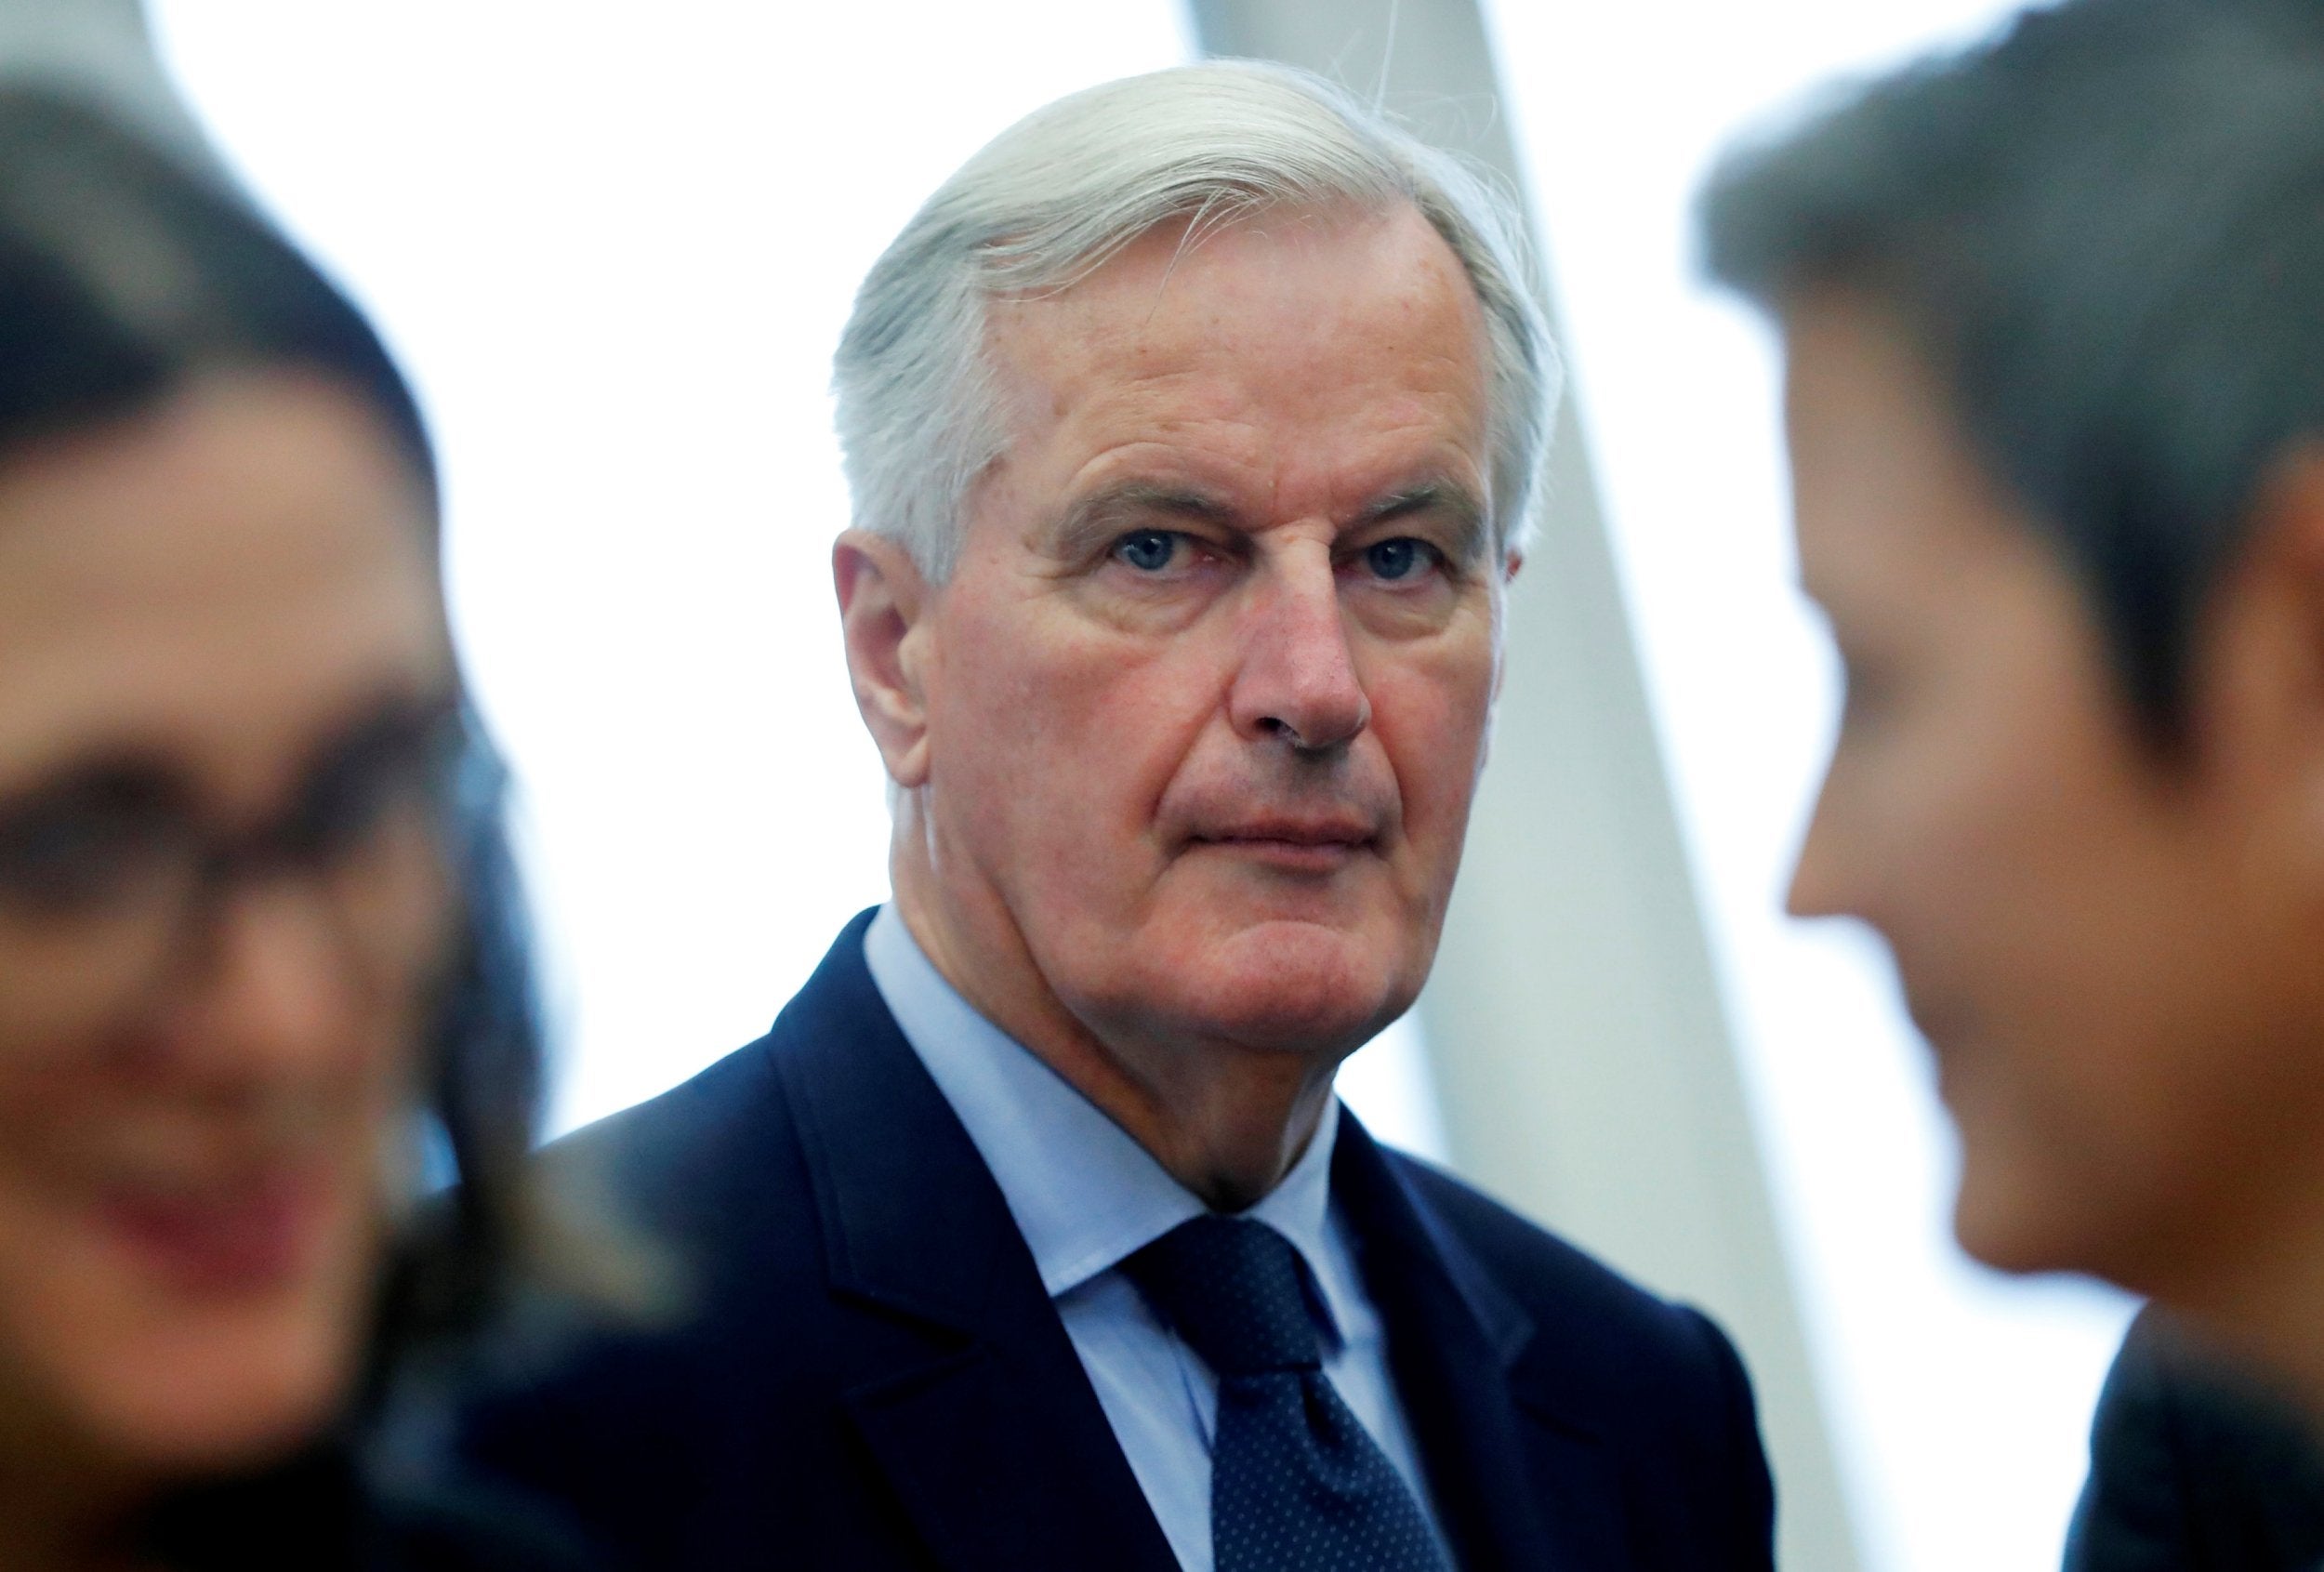 Brexit deal: EU will never accept Theresa May&apos;s Brexit plan B, Michel Barnier says